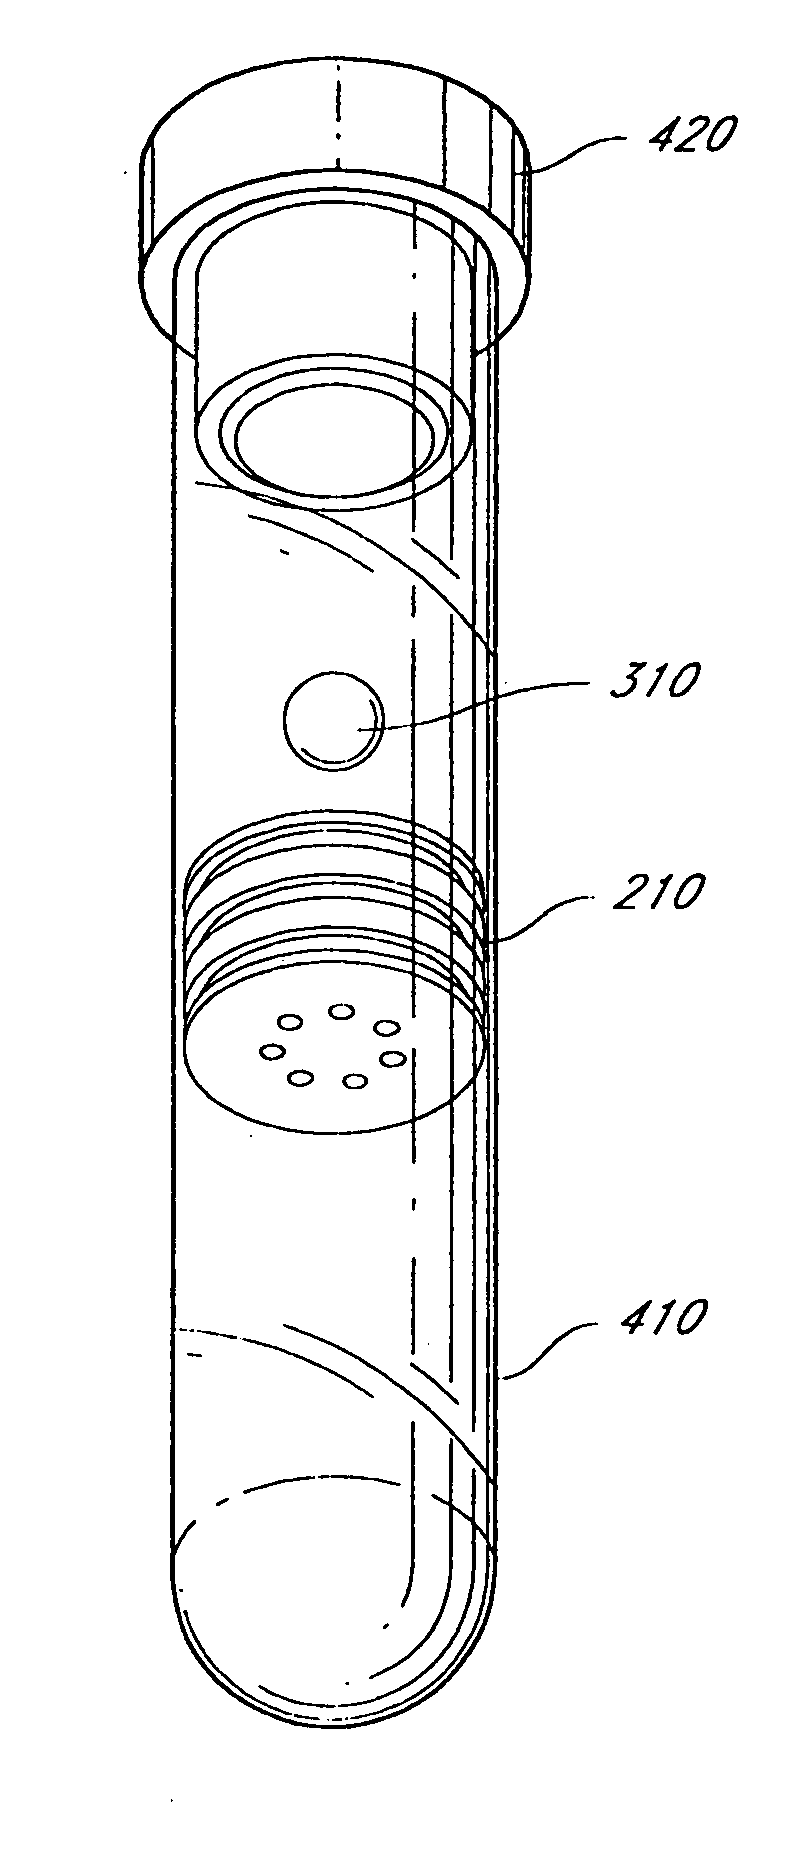 Valve for facilitating and maintaining separation of fluids and materials